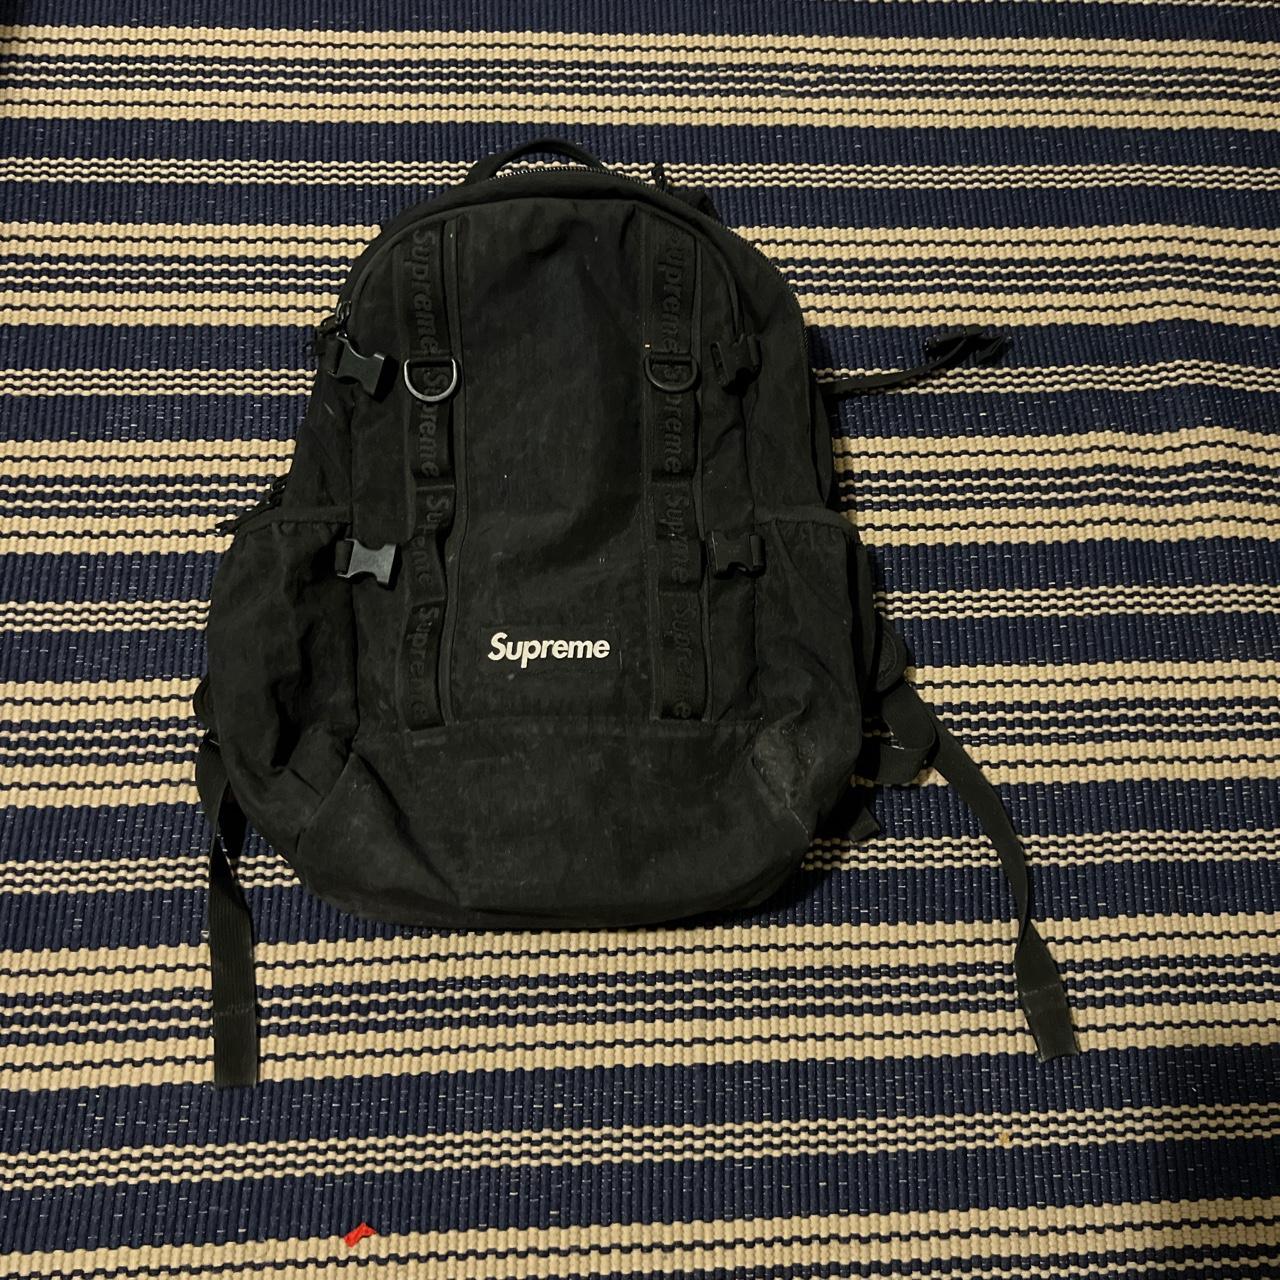 Supreme FW/20 Backpack HEAVILY WORN WITH TEARS AND - Depop